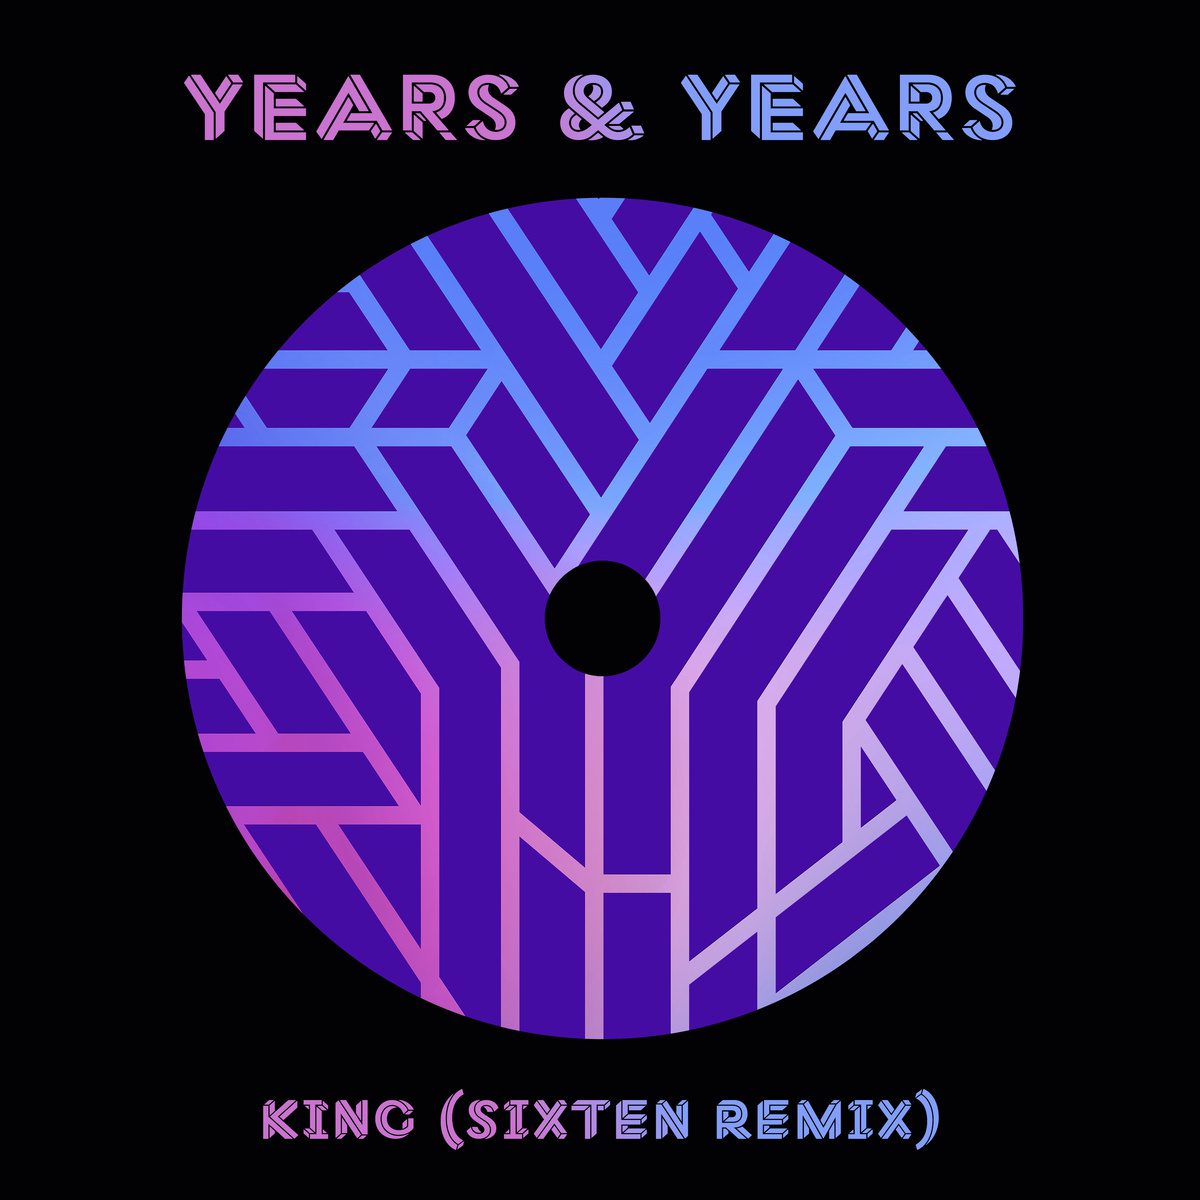 YEARS & YEARS RELEASES NEW REMIX OF 2015 HIT “KING” WITH SIXTEN